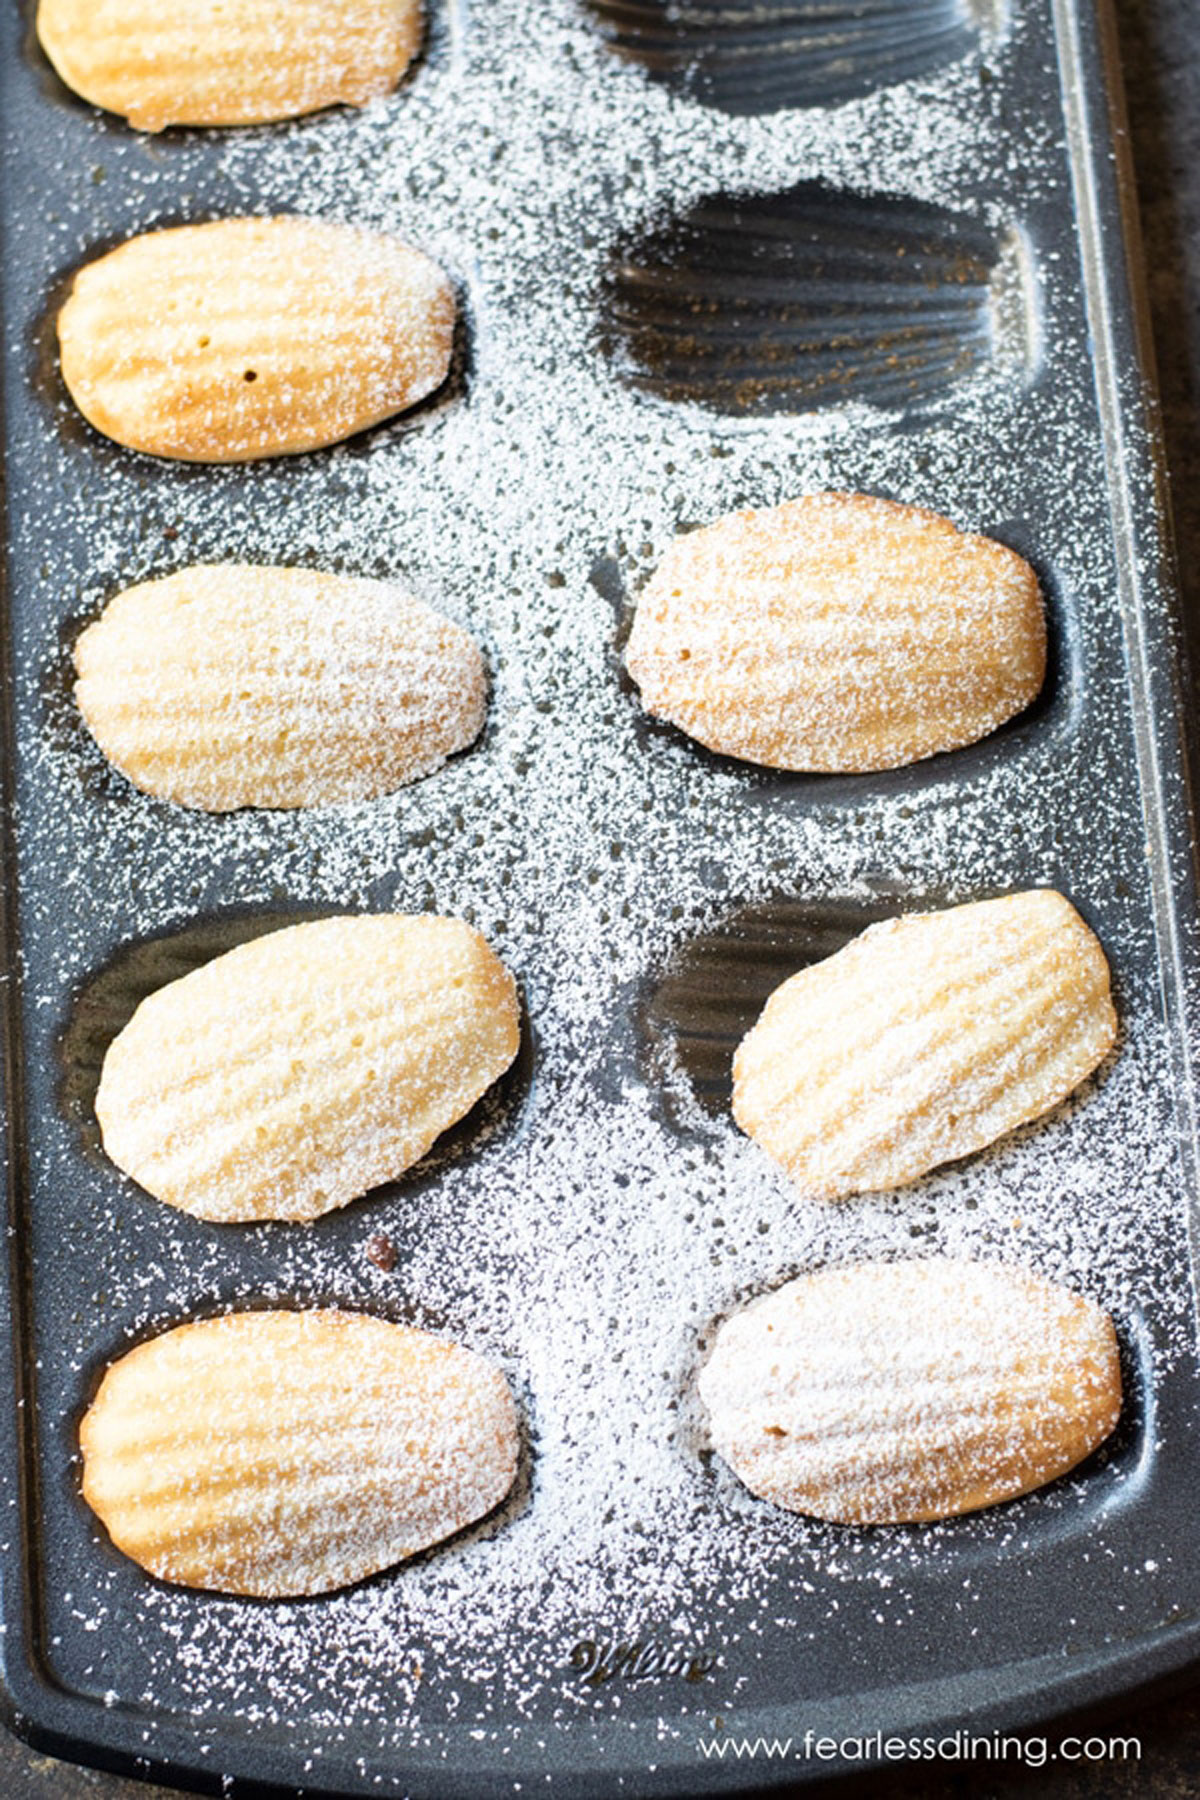 A madeleine pan full of gluten free madeleines dusted with powdered sugar.